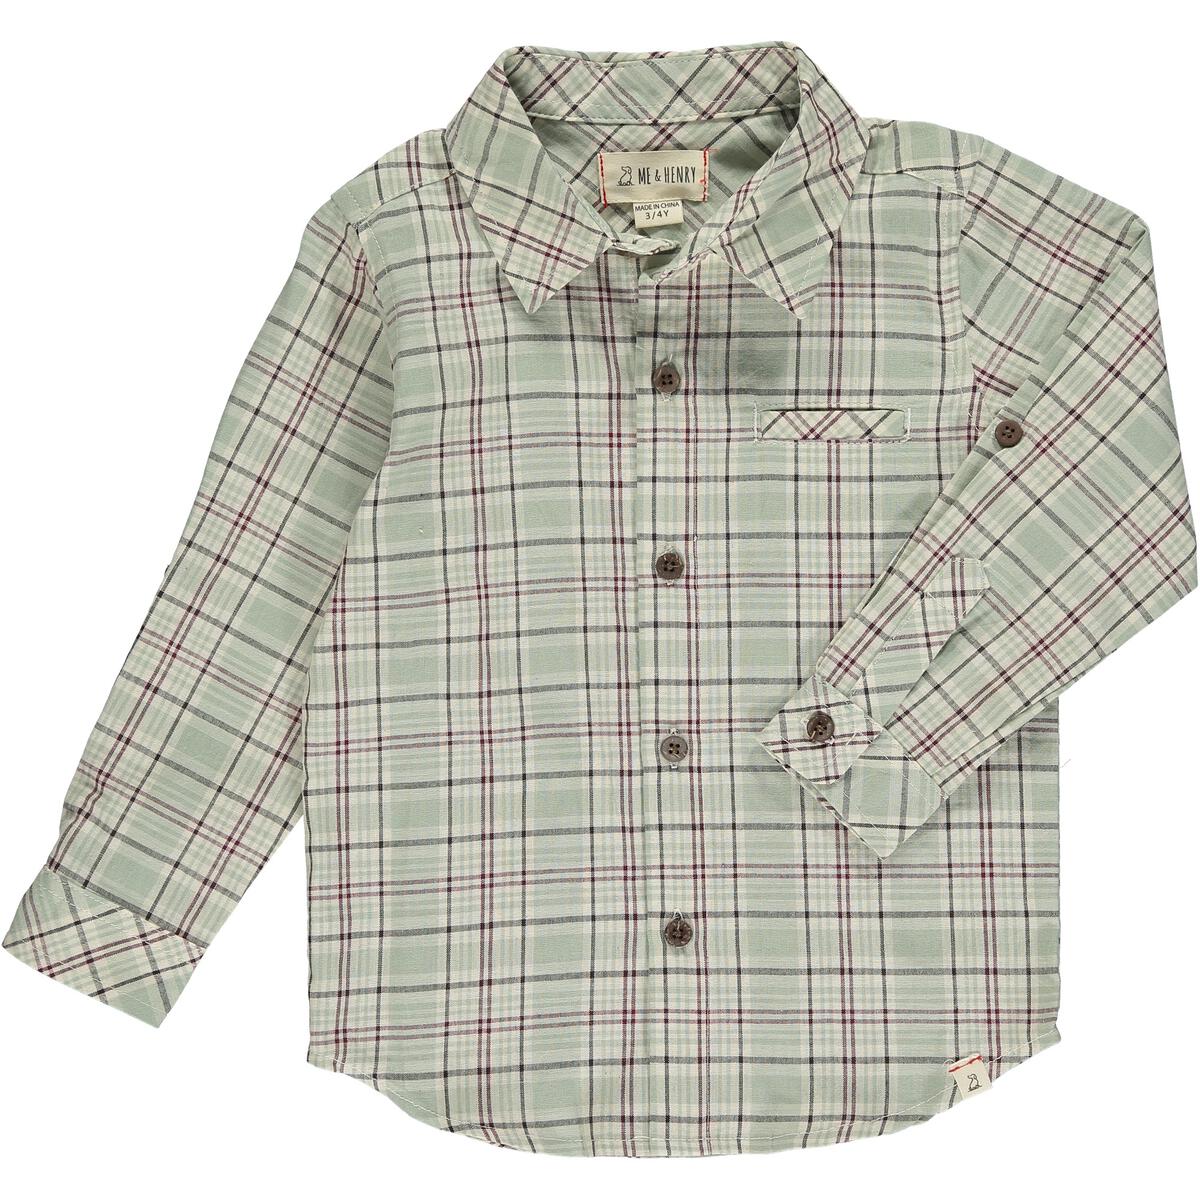 Me & Henry - Atwood Woven Shirt - Green Plaid